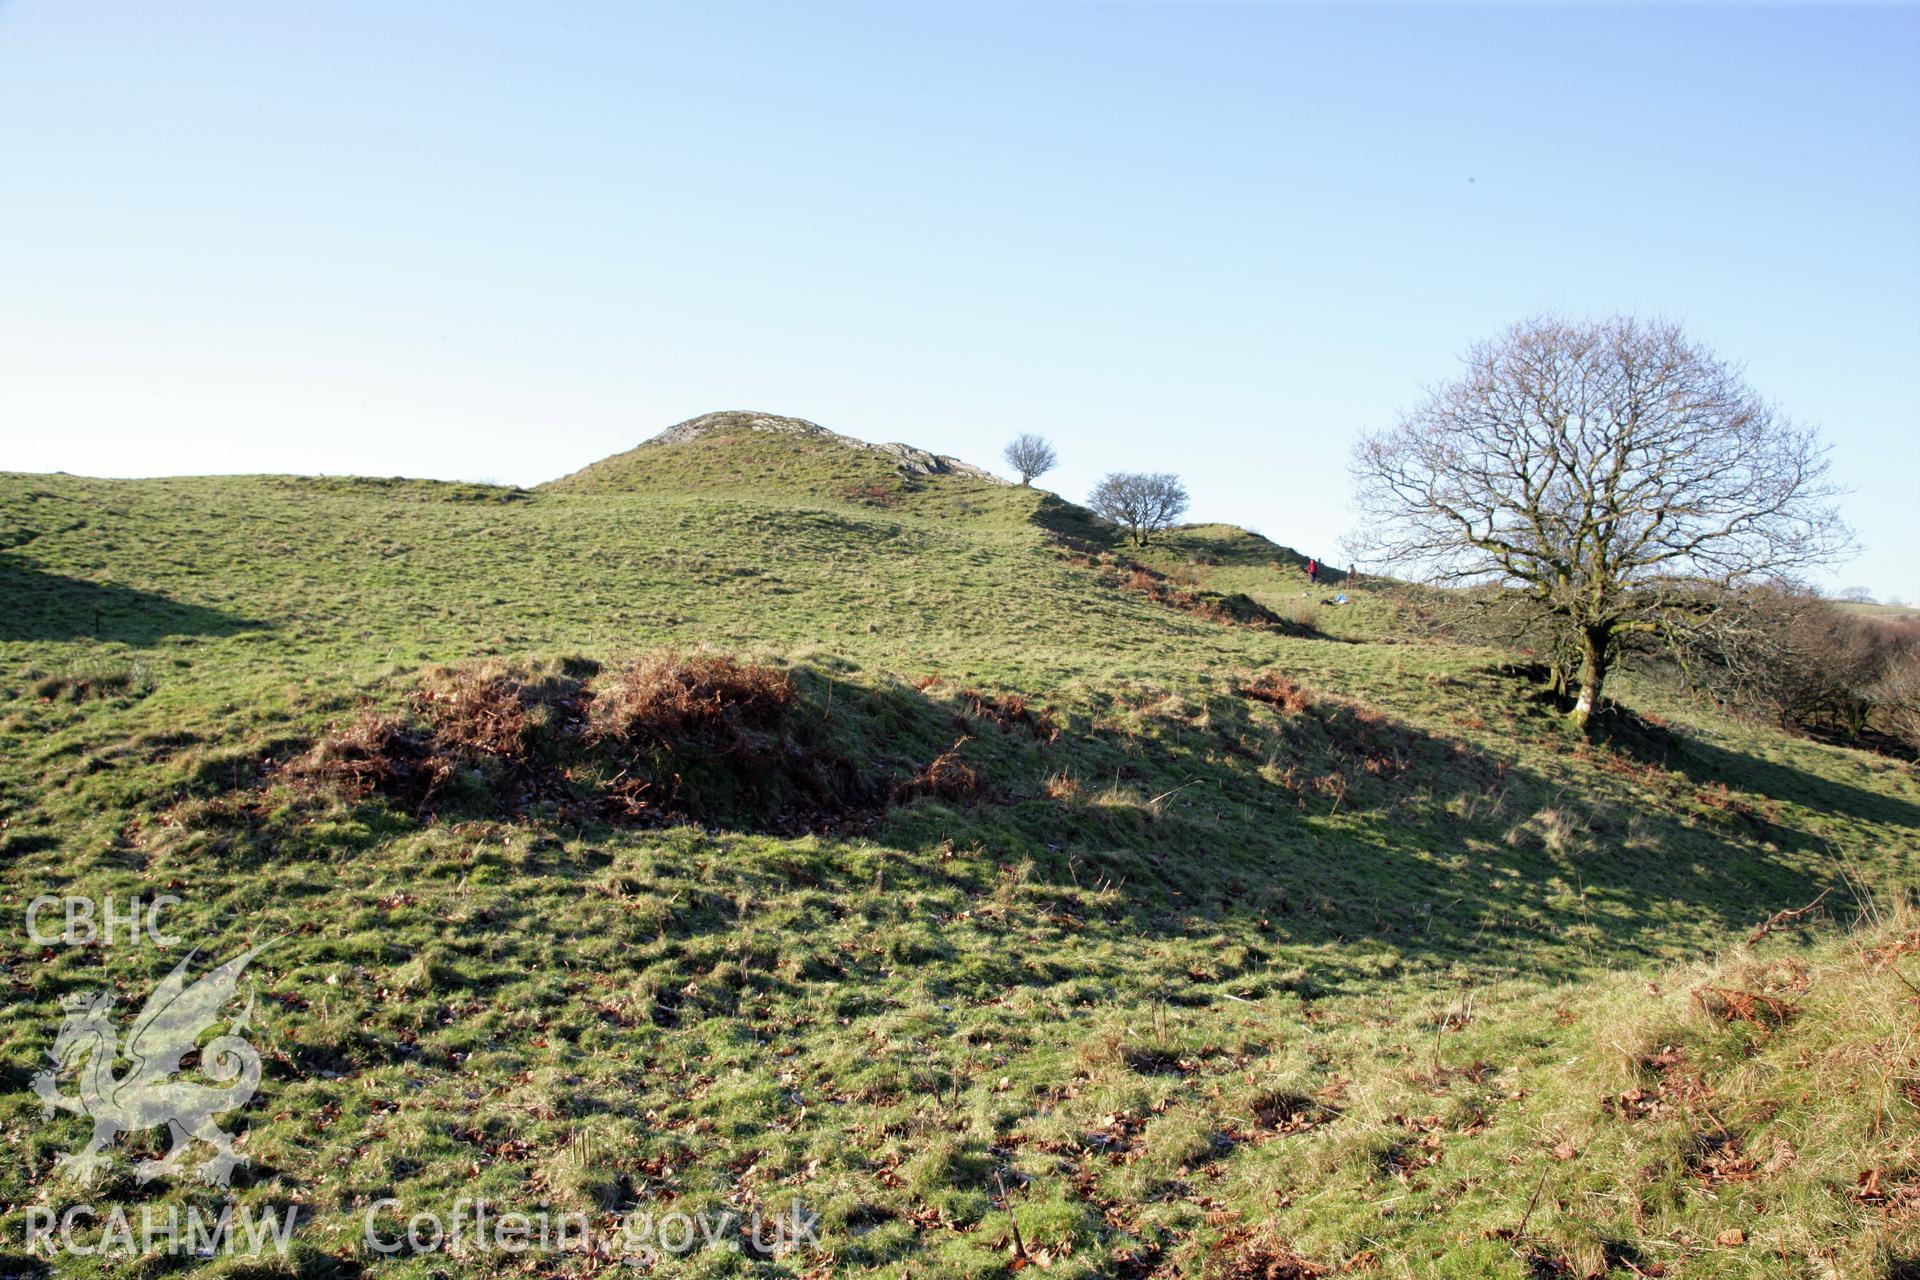 Castell Grogwynion hillfort, Royal Commission survey 2012, general view of earthworks in low light from east